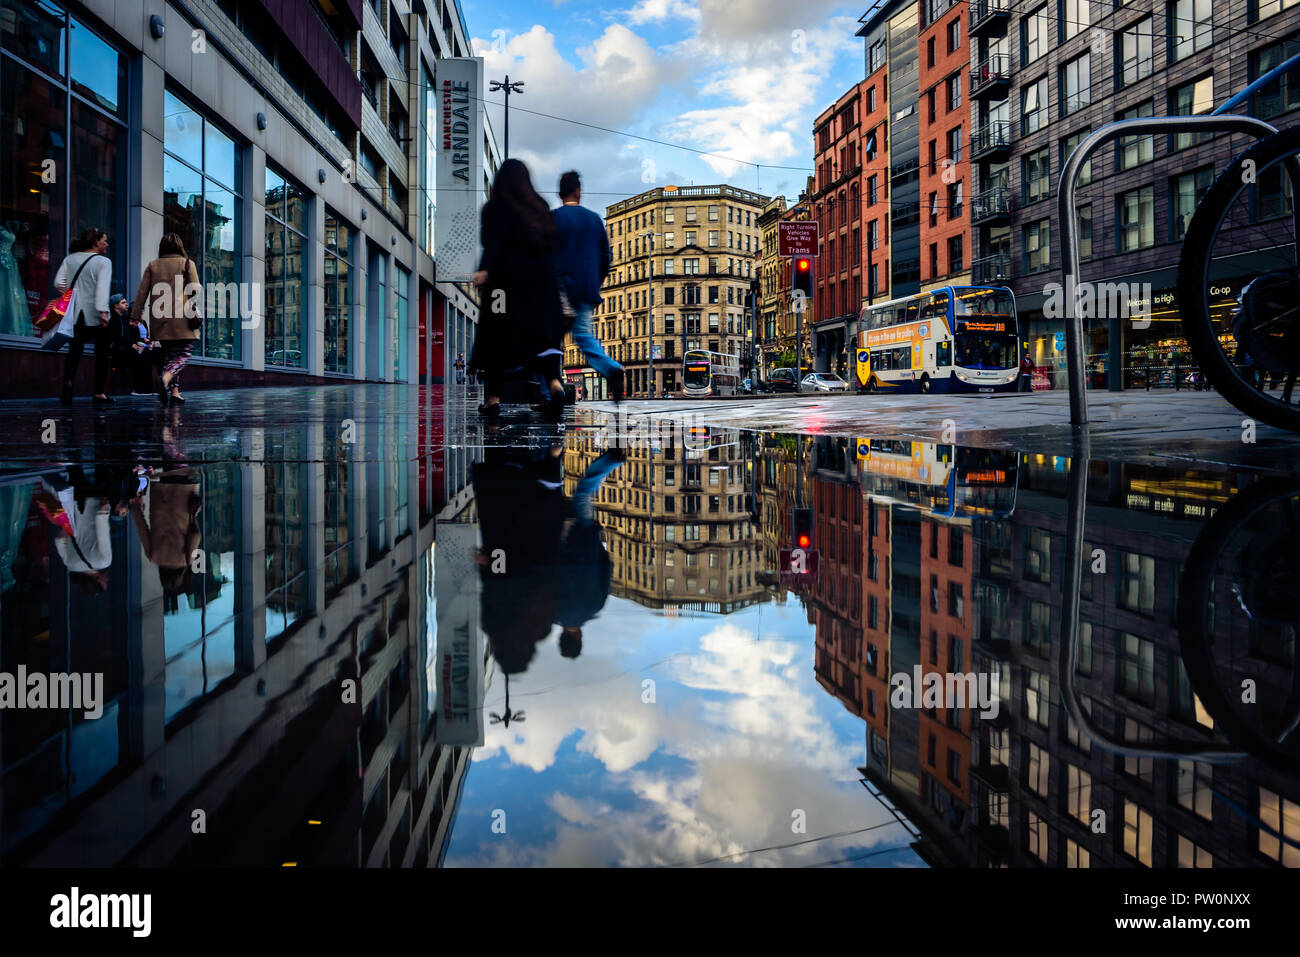 Shoppers going about their business in the city centre. Interestingly symmetrical image of Manchester City Centre. Stock Photo